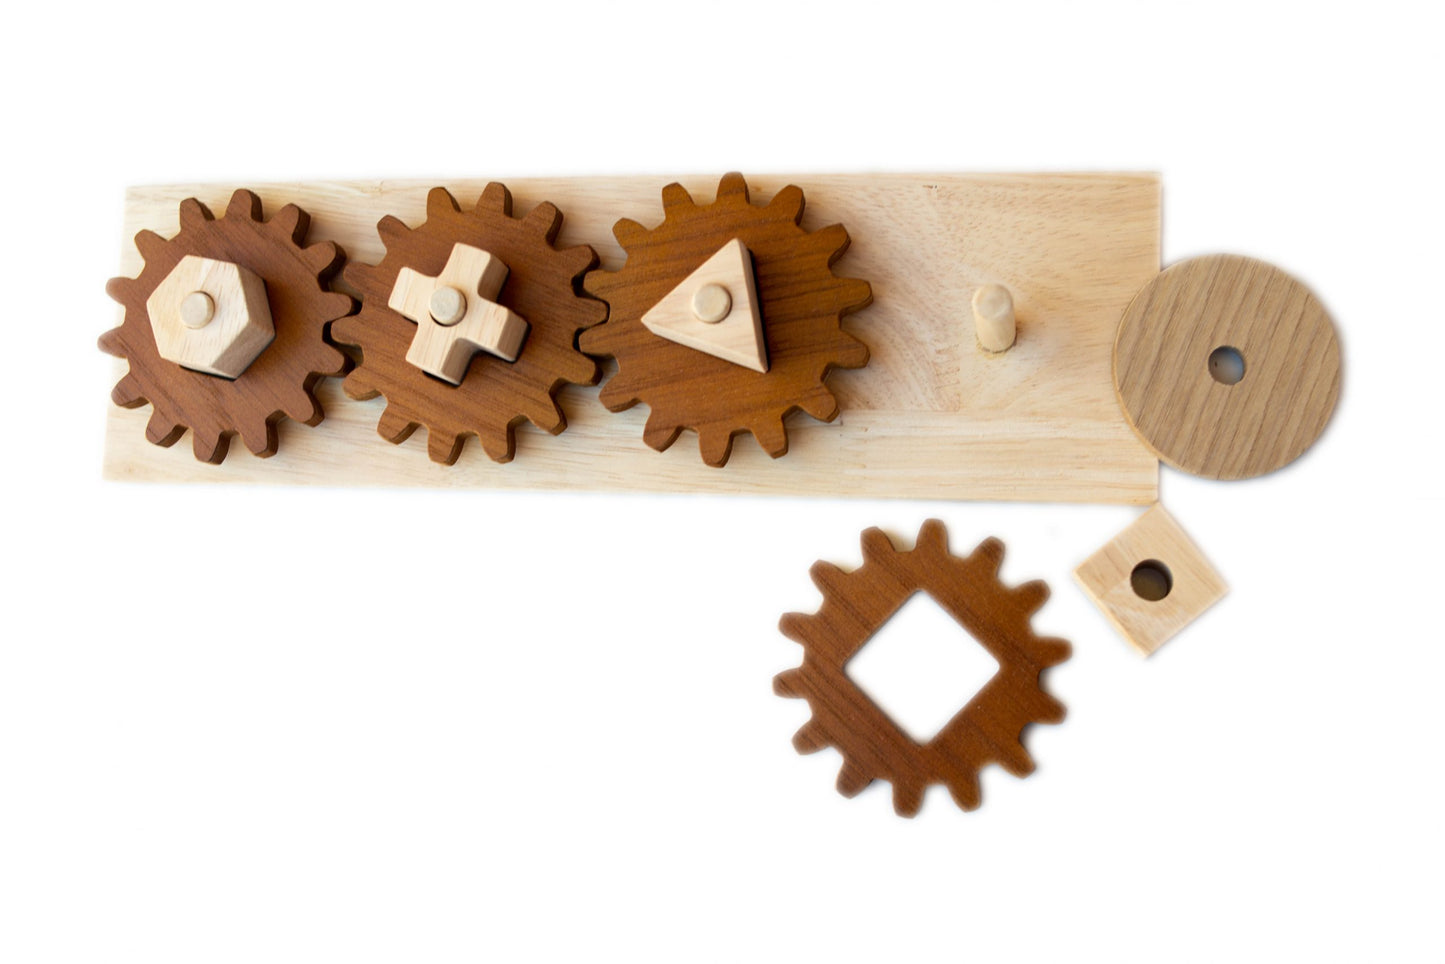 Wooden Gear Puzzle